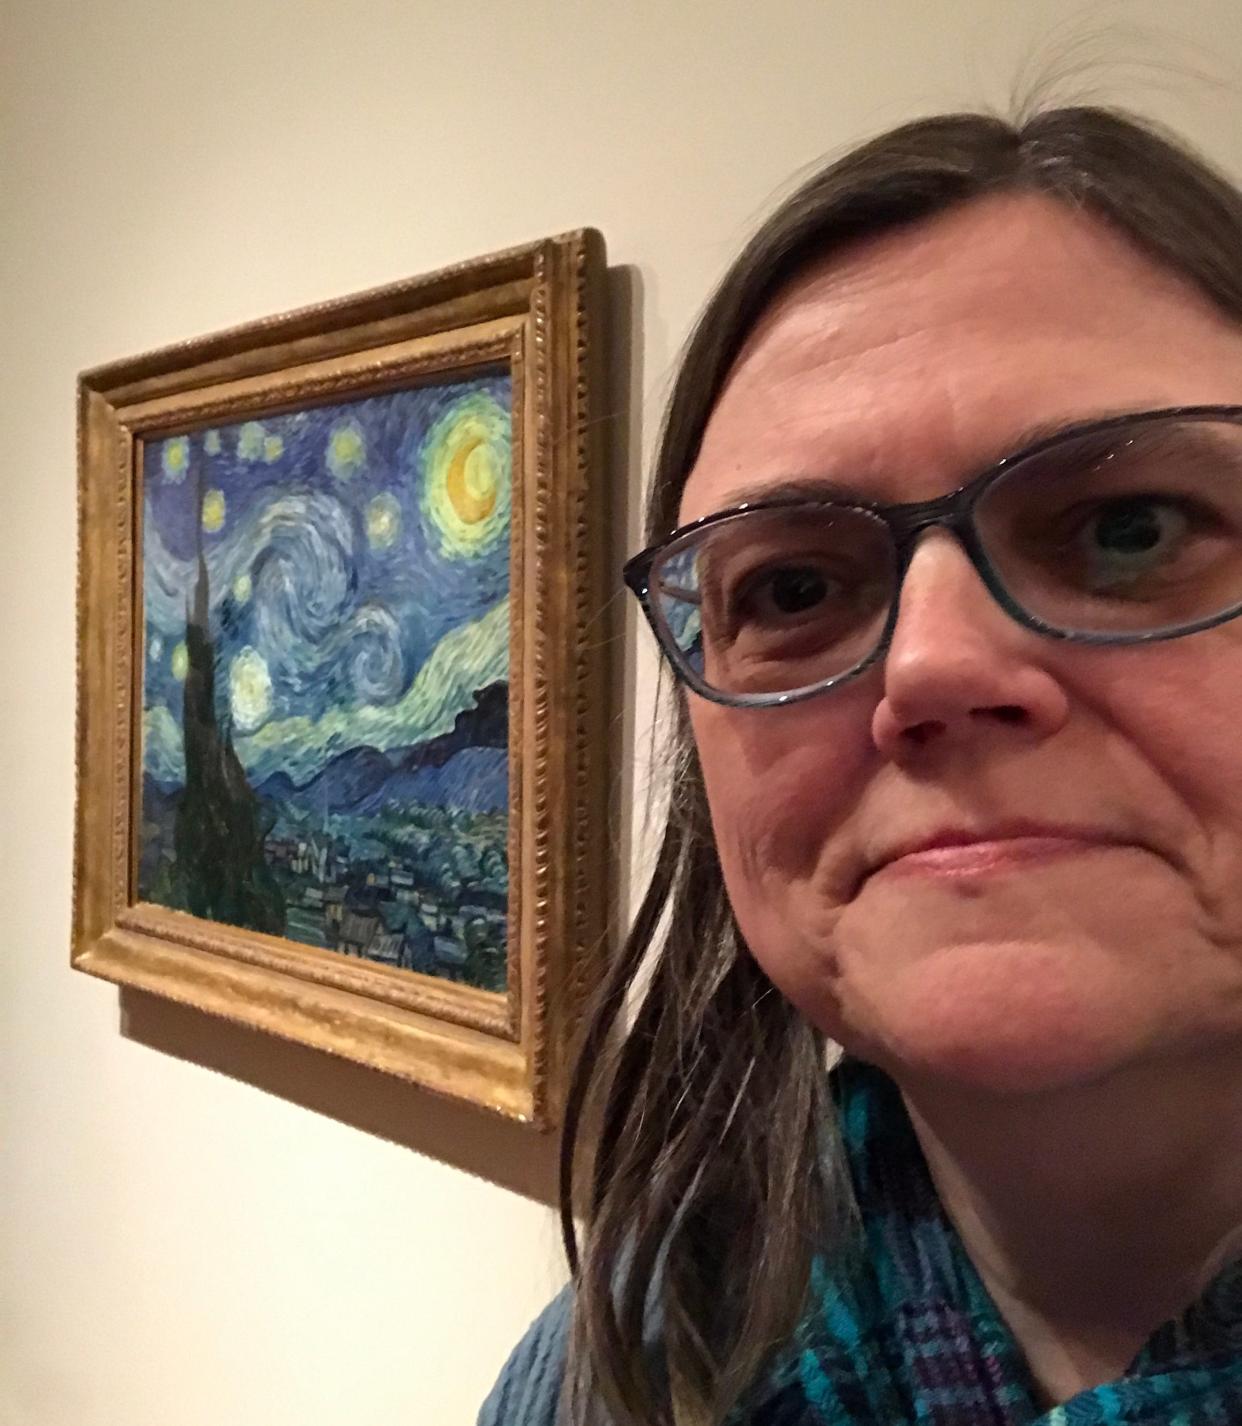 The Starry Night at MOMA